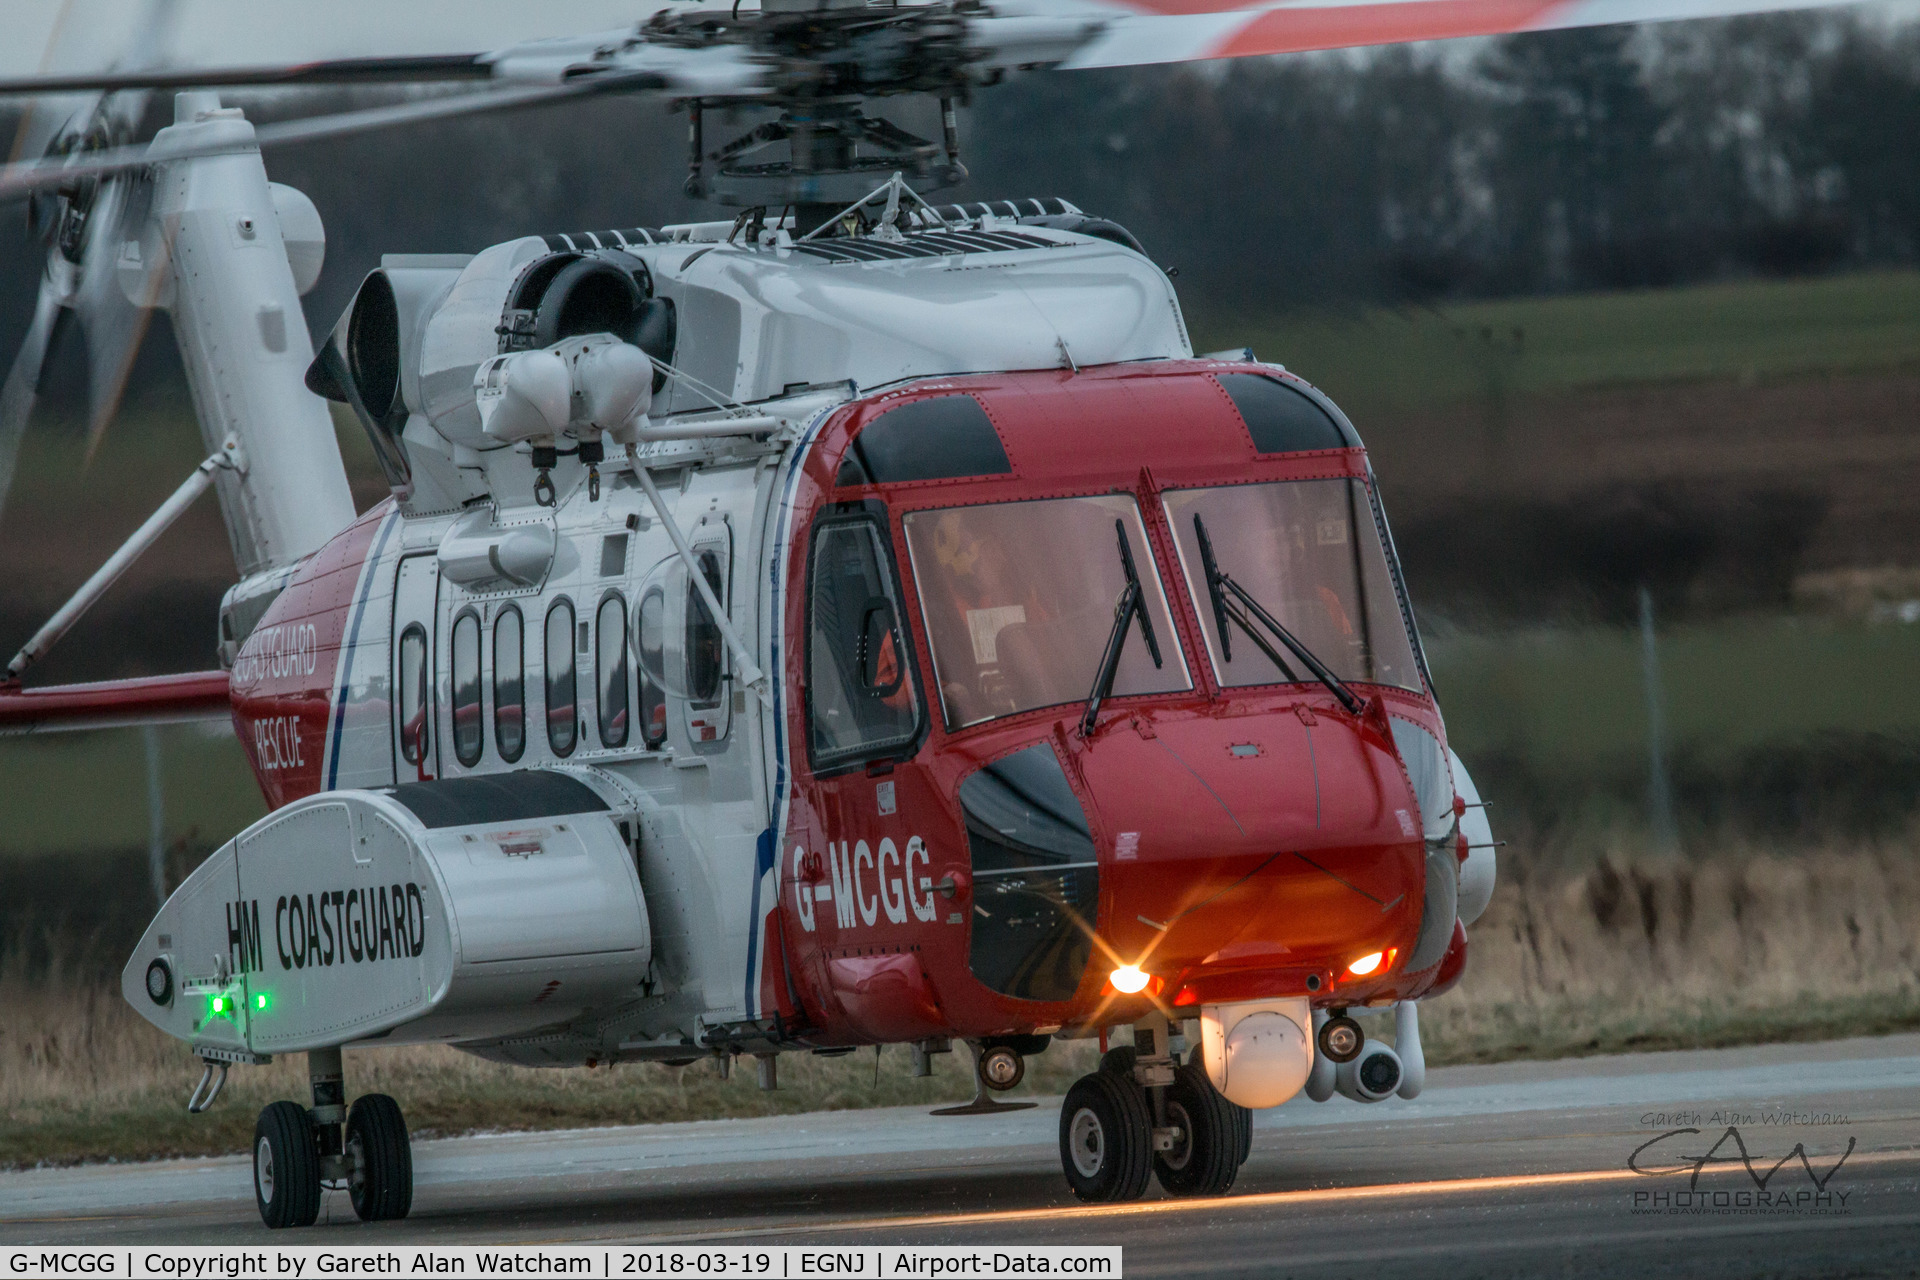 G-MCGG, 2014 Sikorsky S-92A C/N 920225, Operating as Coastguard 912 
(G-MCGG not usually based at HUY)